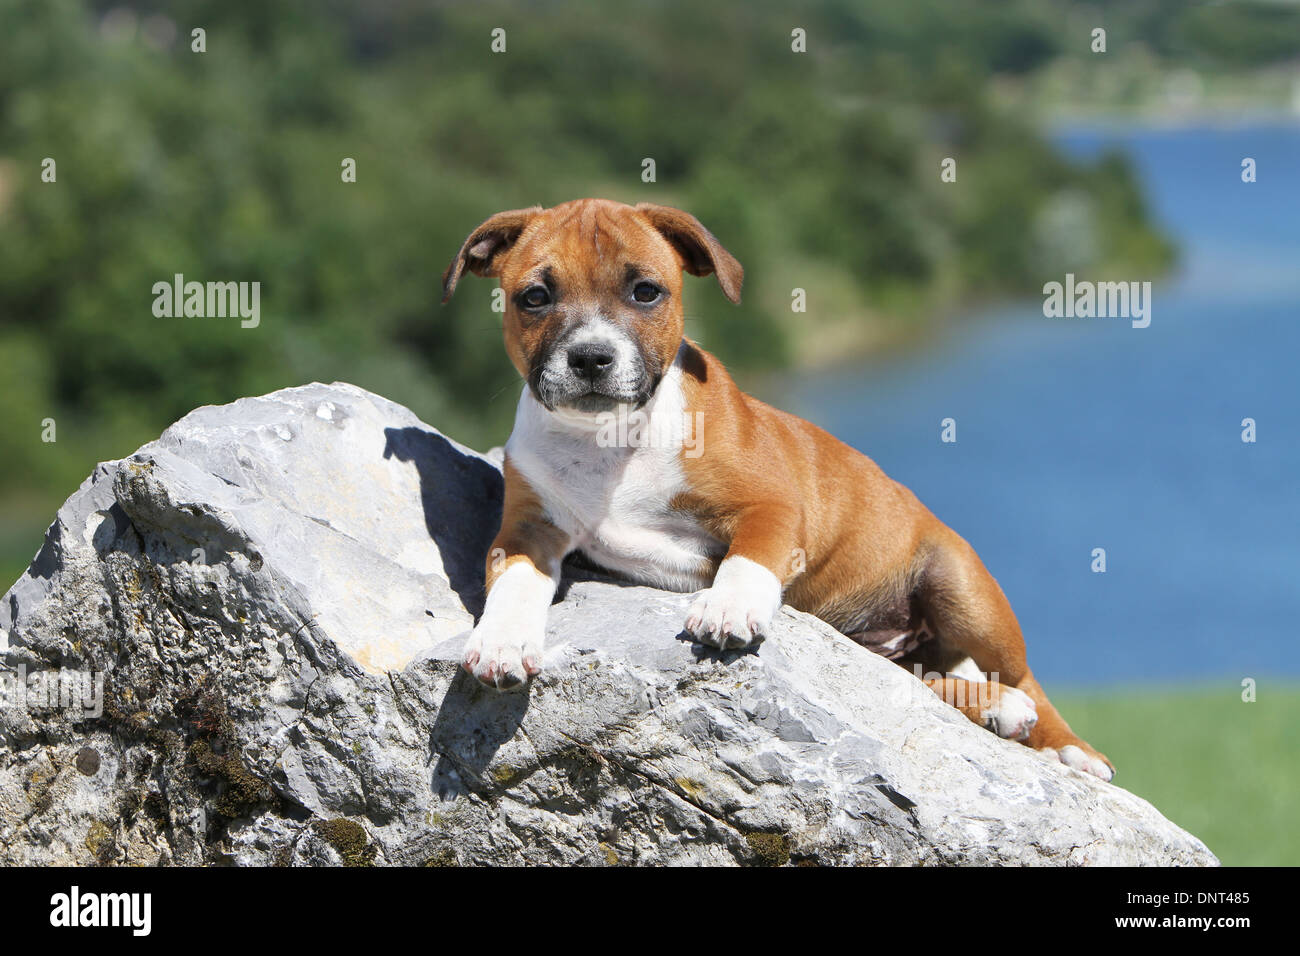 dog Staffordshire Bull Terrier / Staffie  puppy lying on a rock Stock Photo